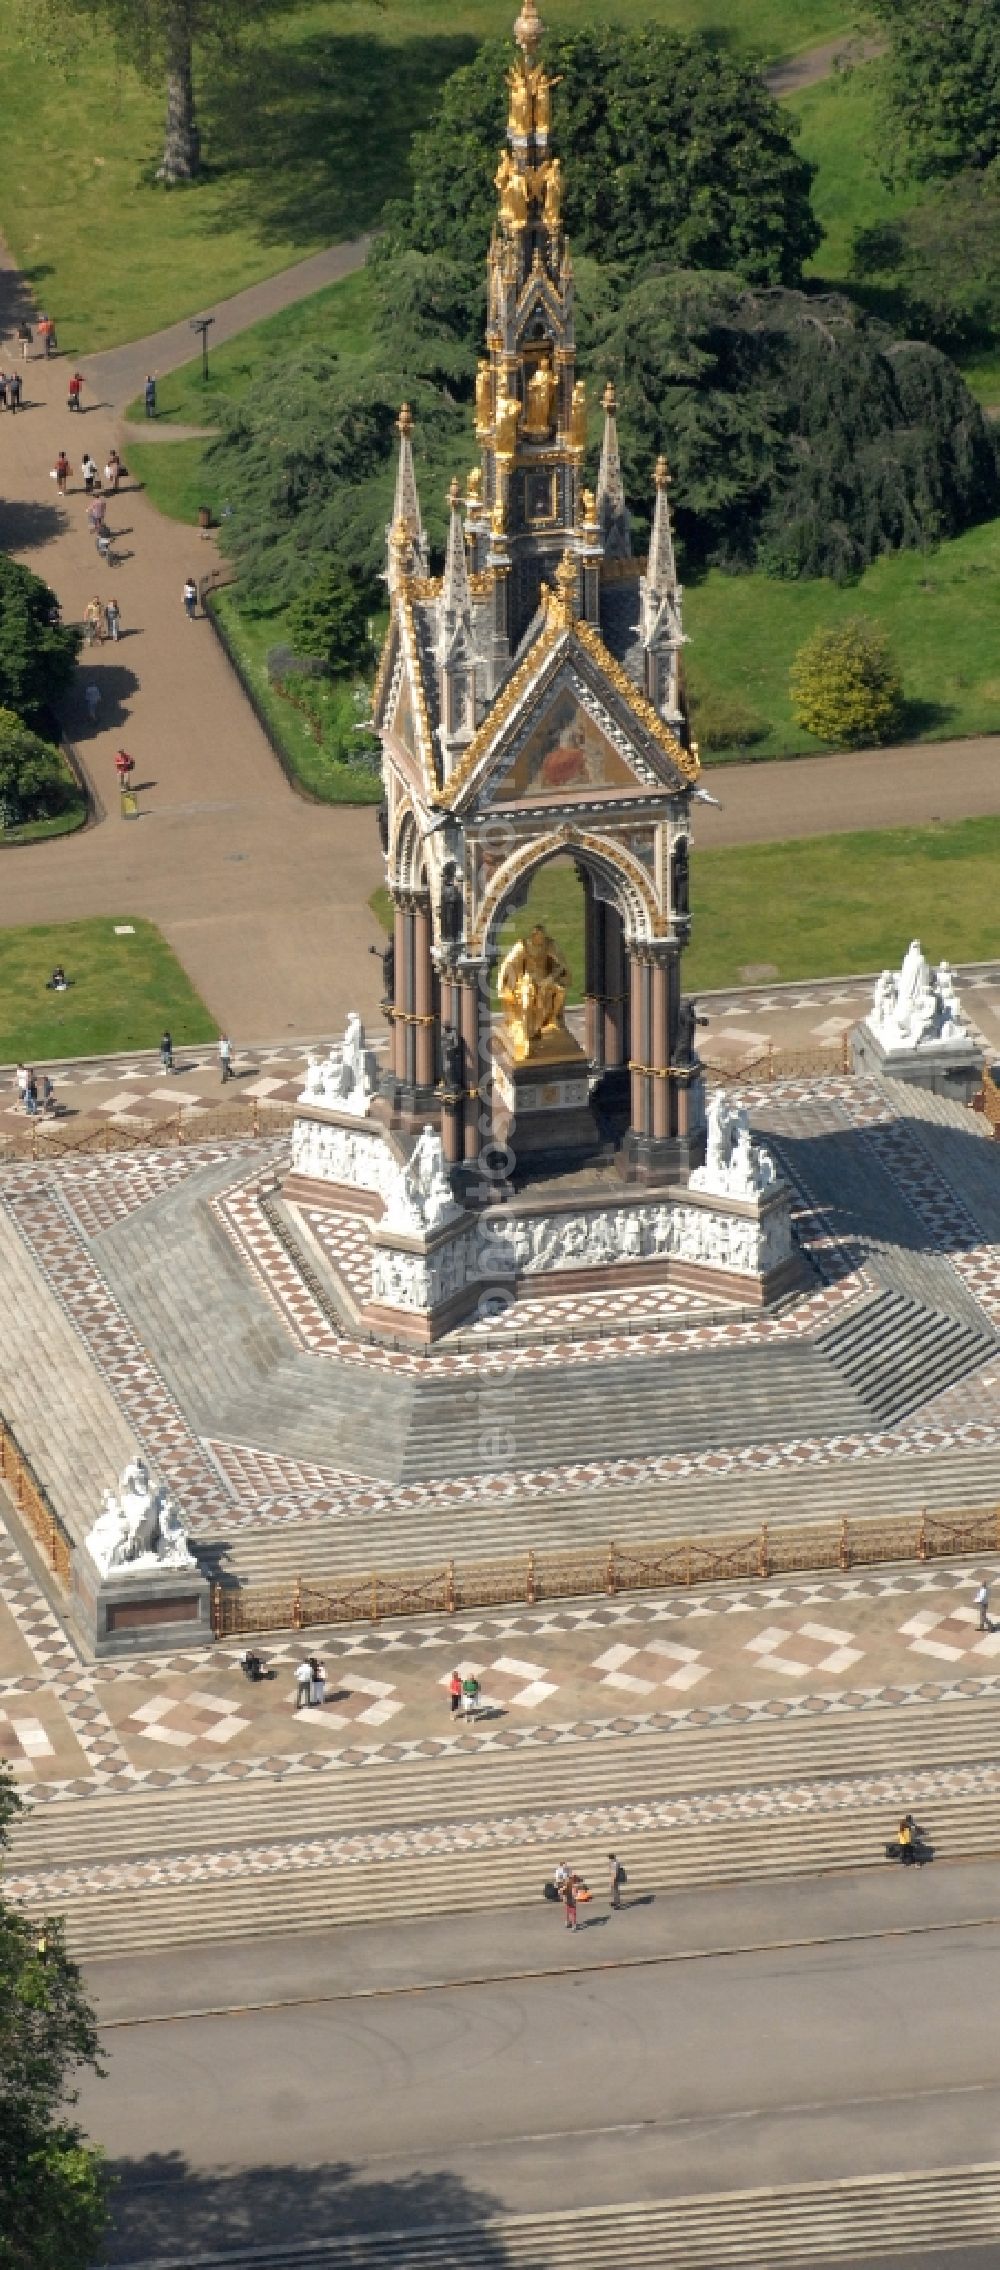 London from the bird's eye view: View of the Albert Memorial in Kensington Gardens in London. The Albert Memorial was commissioned by Queen Victoria of Great Britain and Ireland in memory of Albert of Saxe-Coburg and Gotha in order. It was built by Sir George Gilbert Scott in the years 1864-1875 in the Gothic Revival style